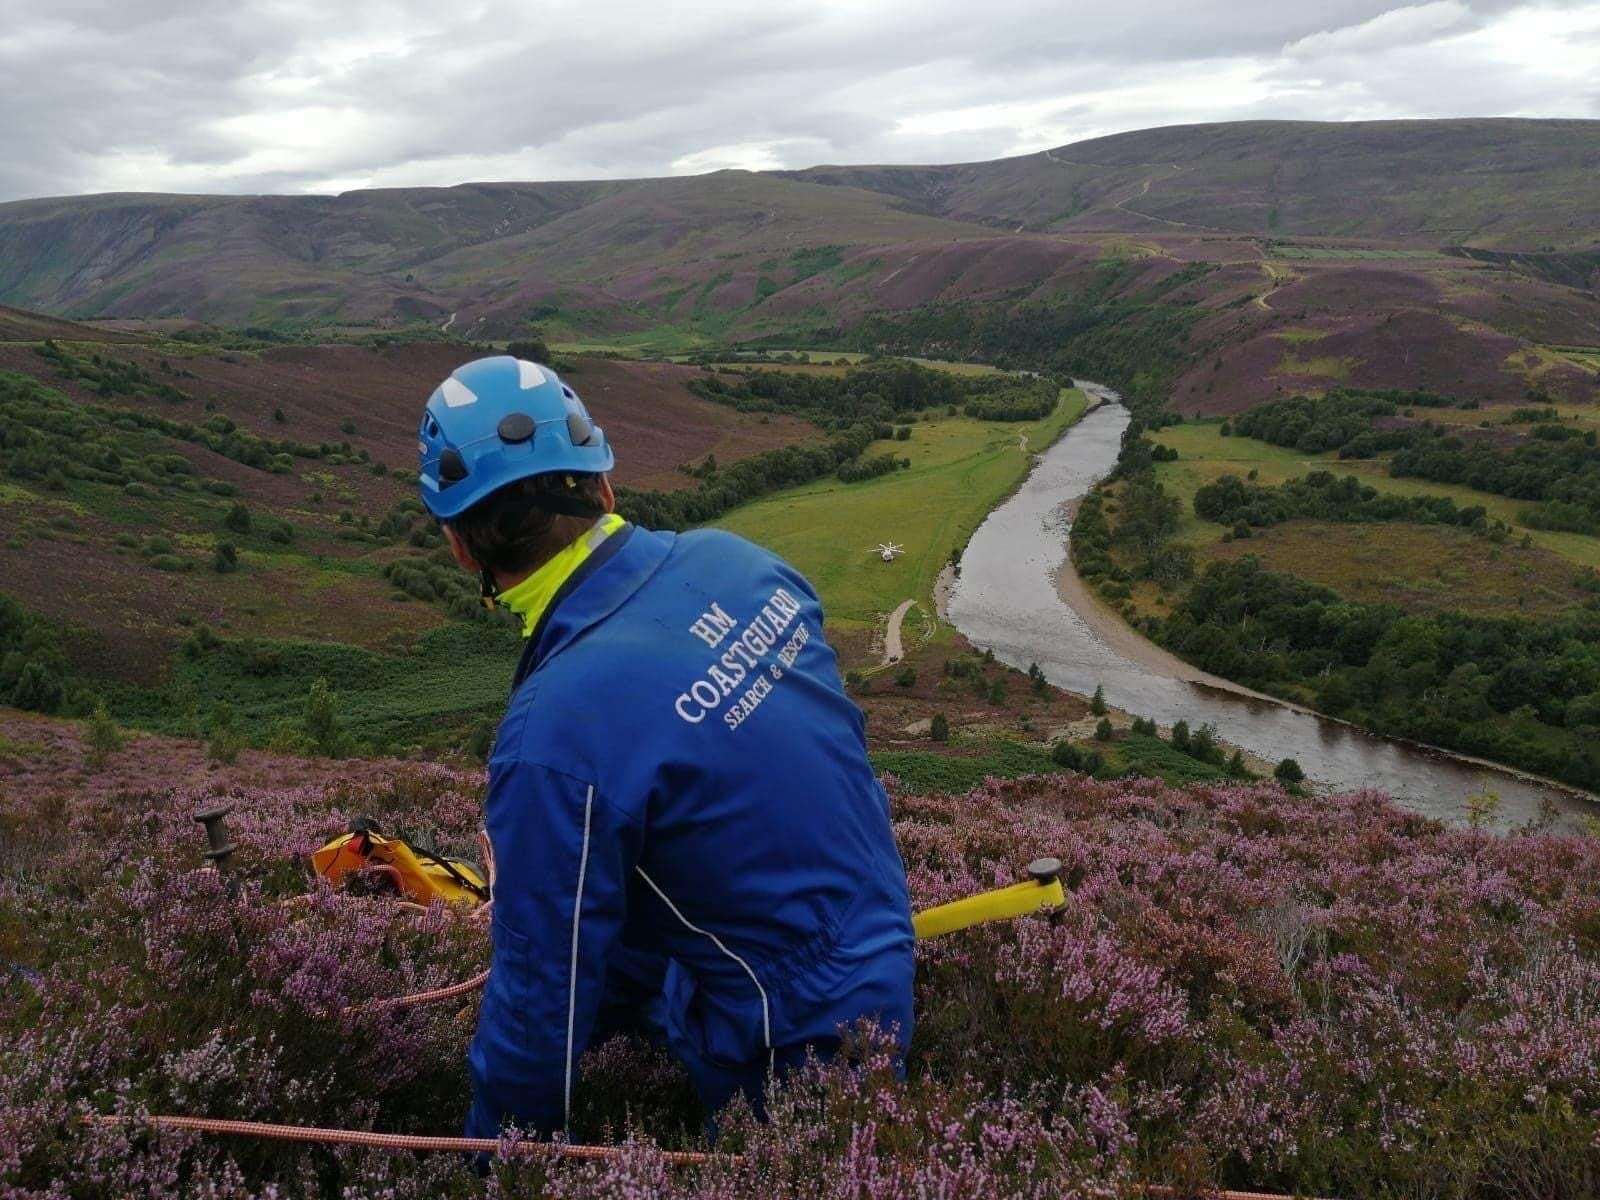 Specialist HM Coastguard rope teams were called out last Friday to assist with a rescue on the River Findhorn.